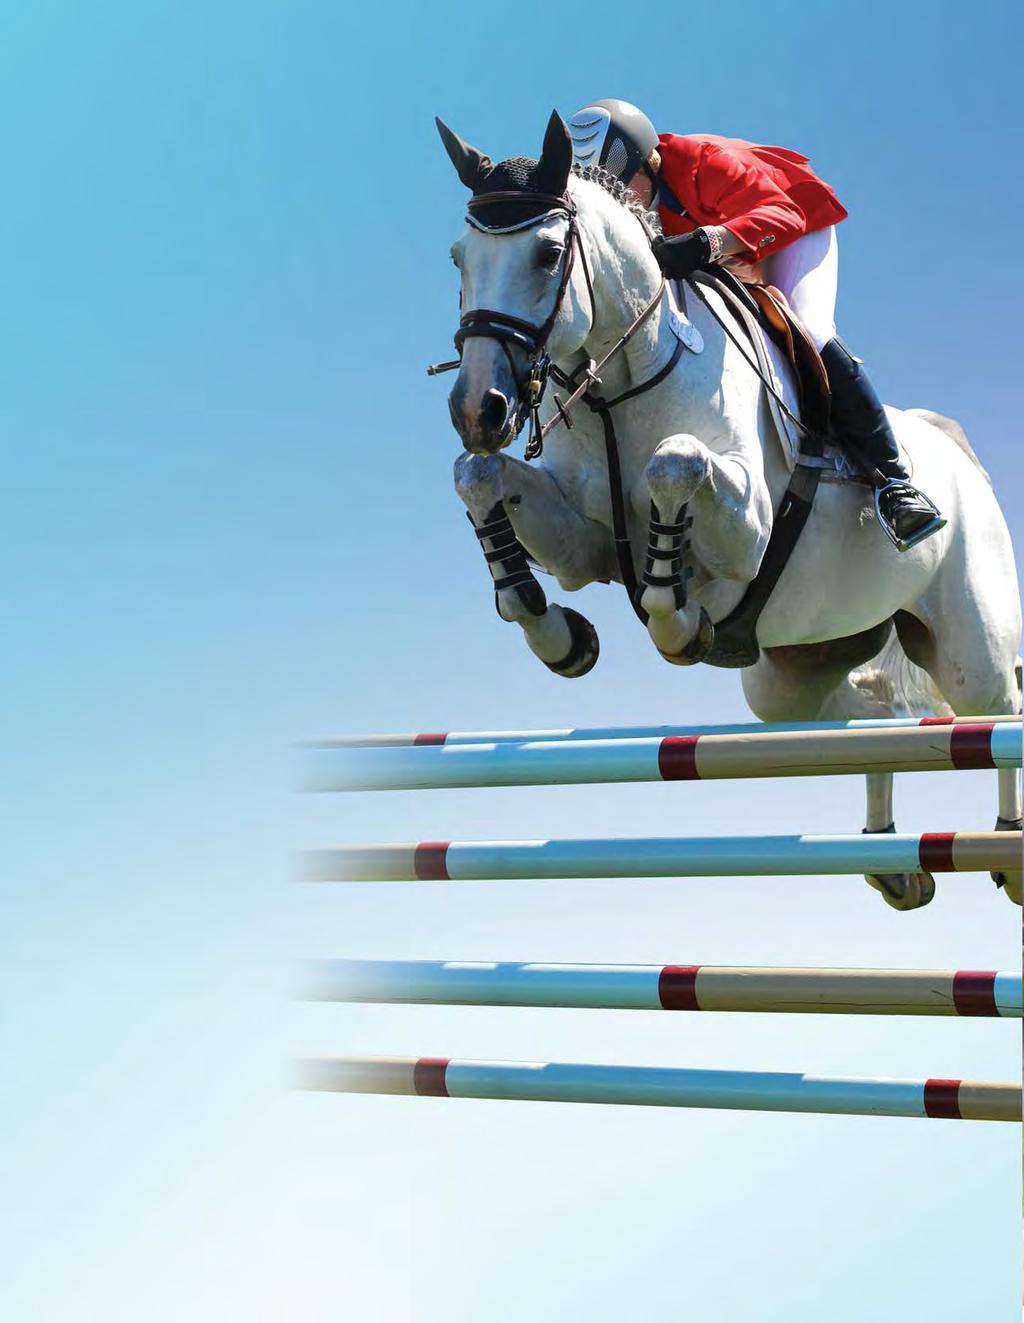 One Ring Wonder Recognized as one of the top horse shows in North America by the North American Riders Group, the Washington International offers the best in show jumping, hunter and